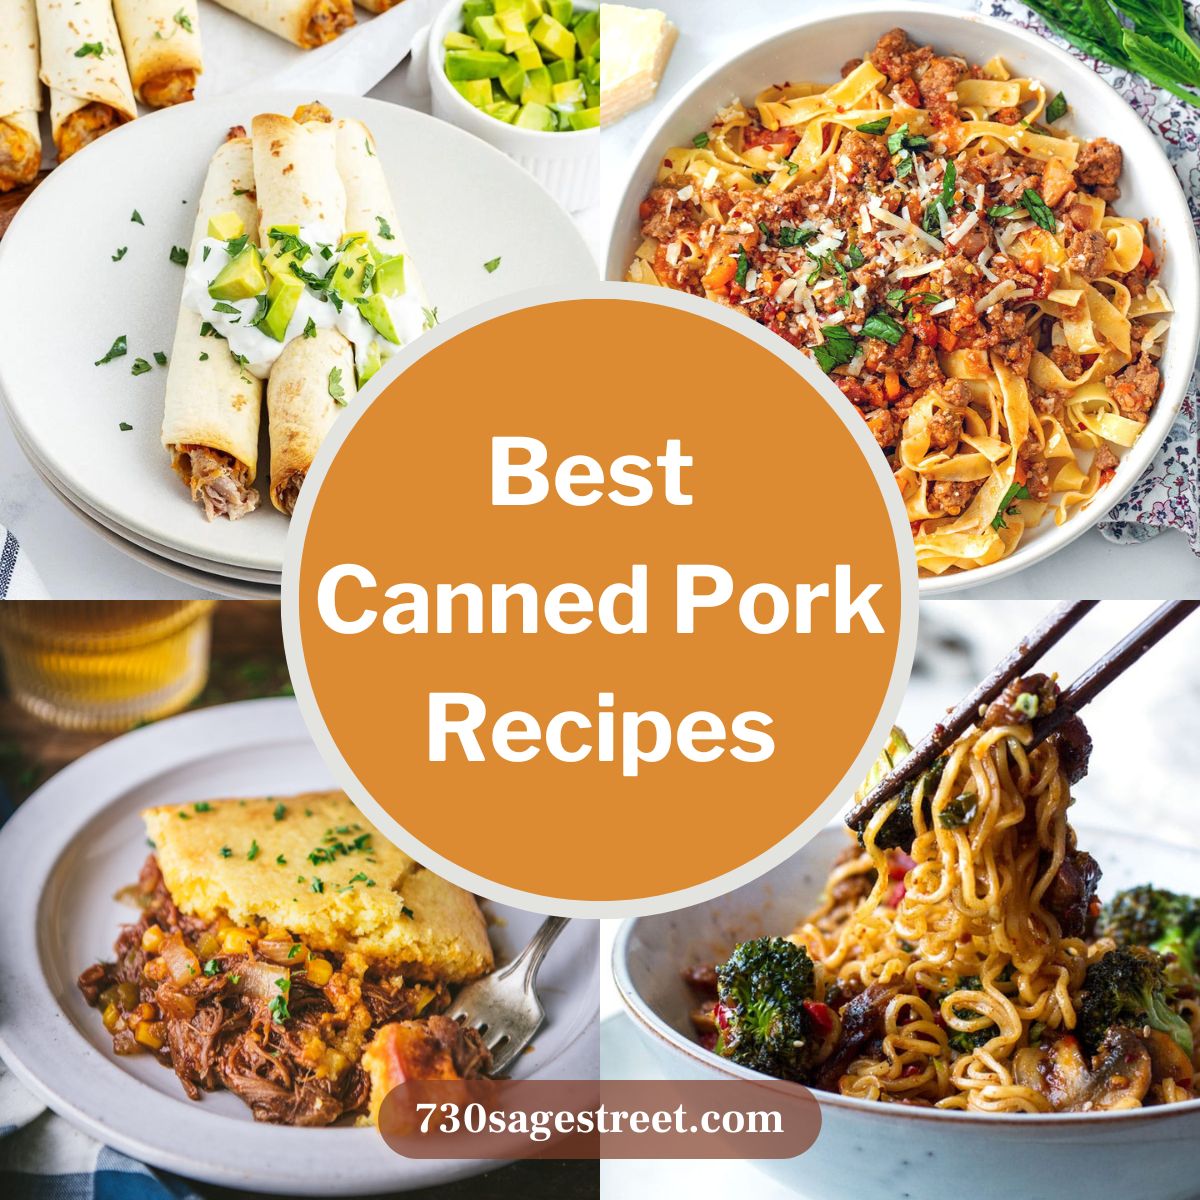 Best Canned Pork Recipes